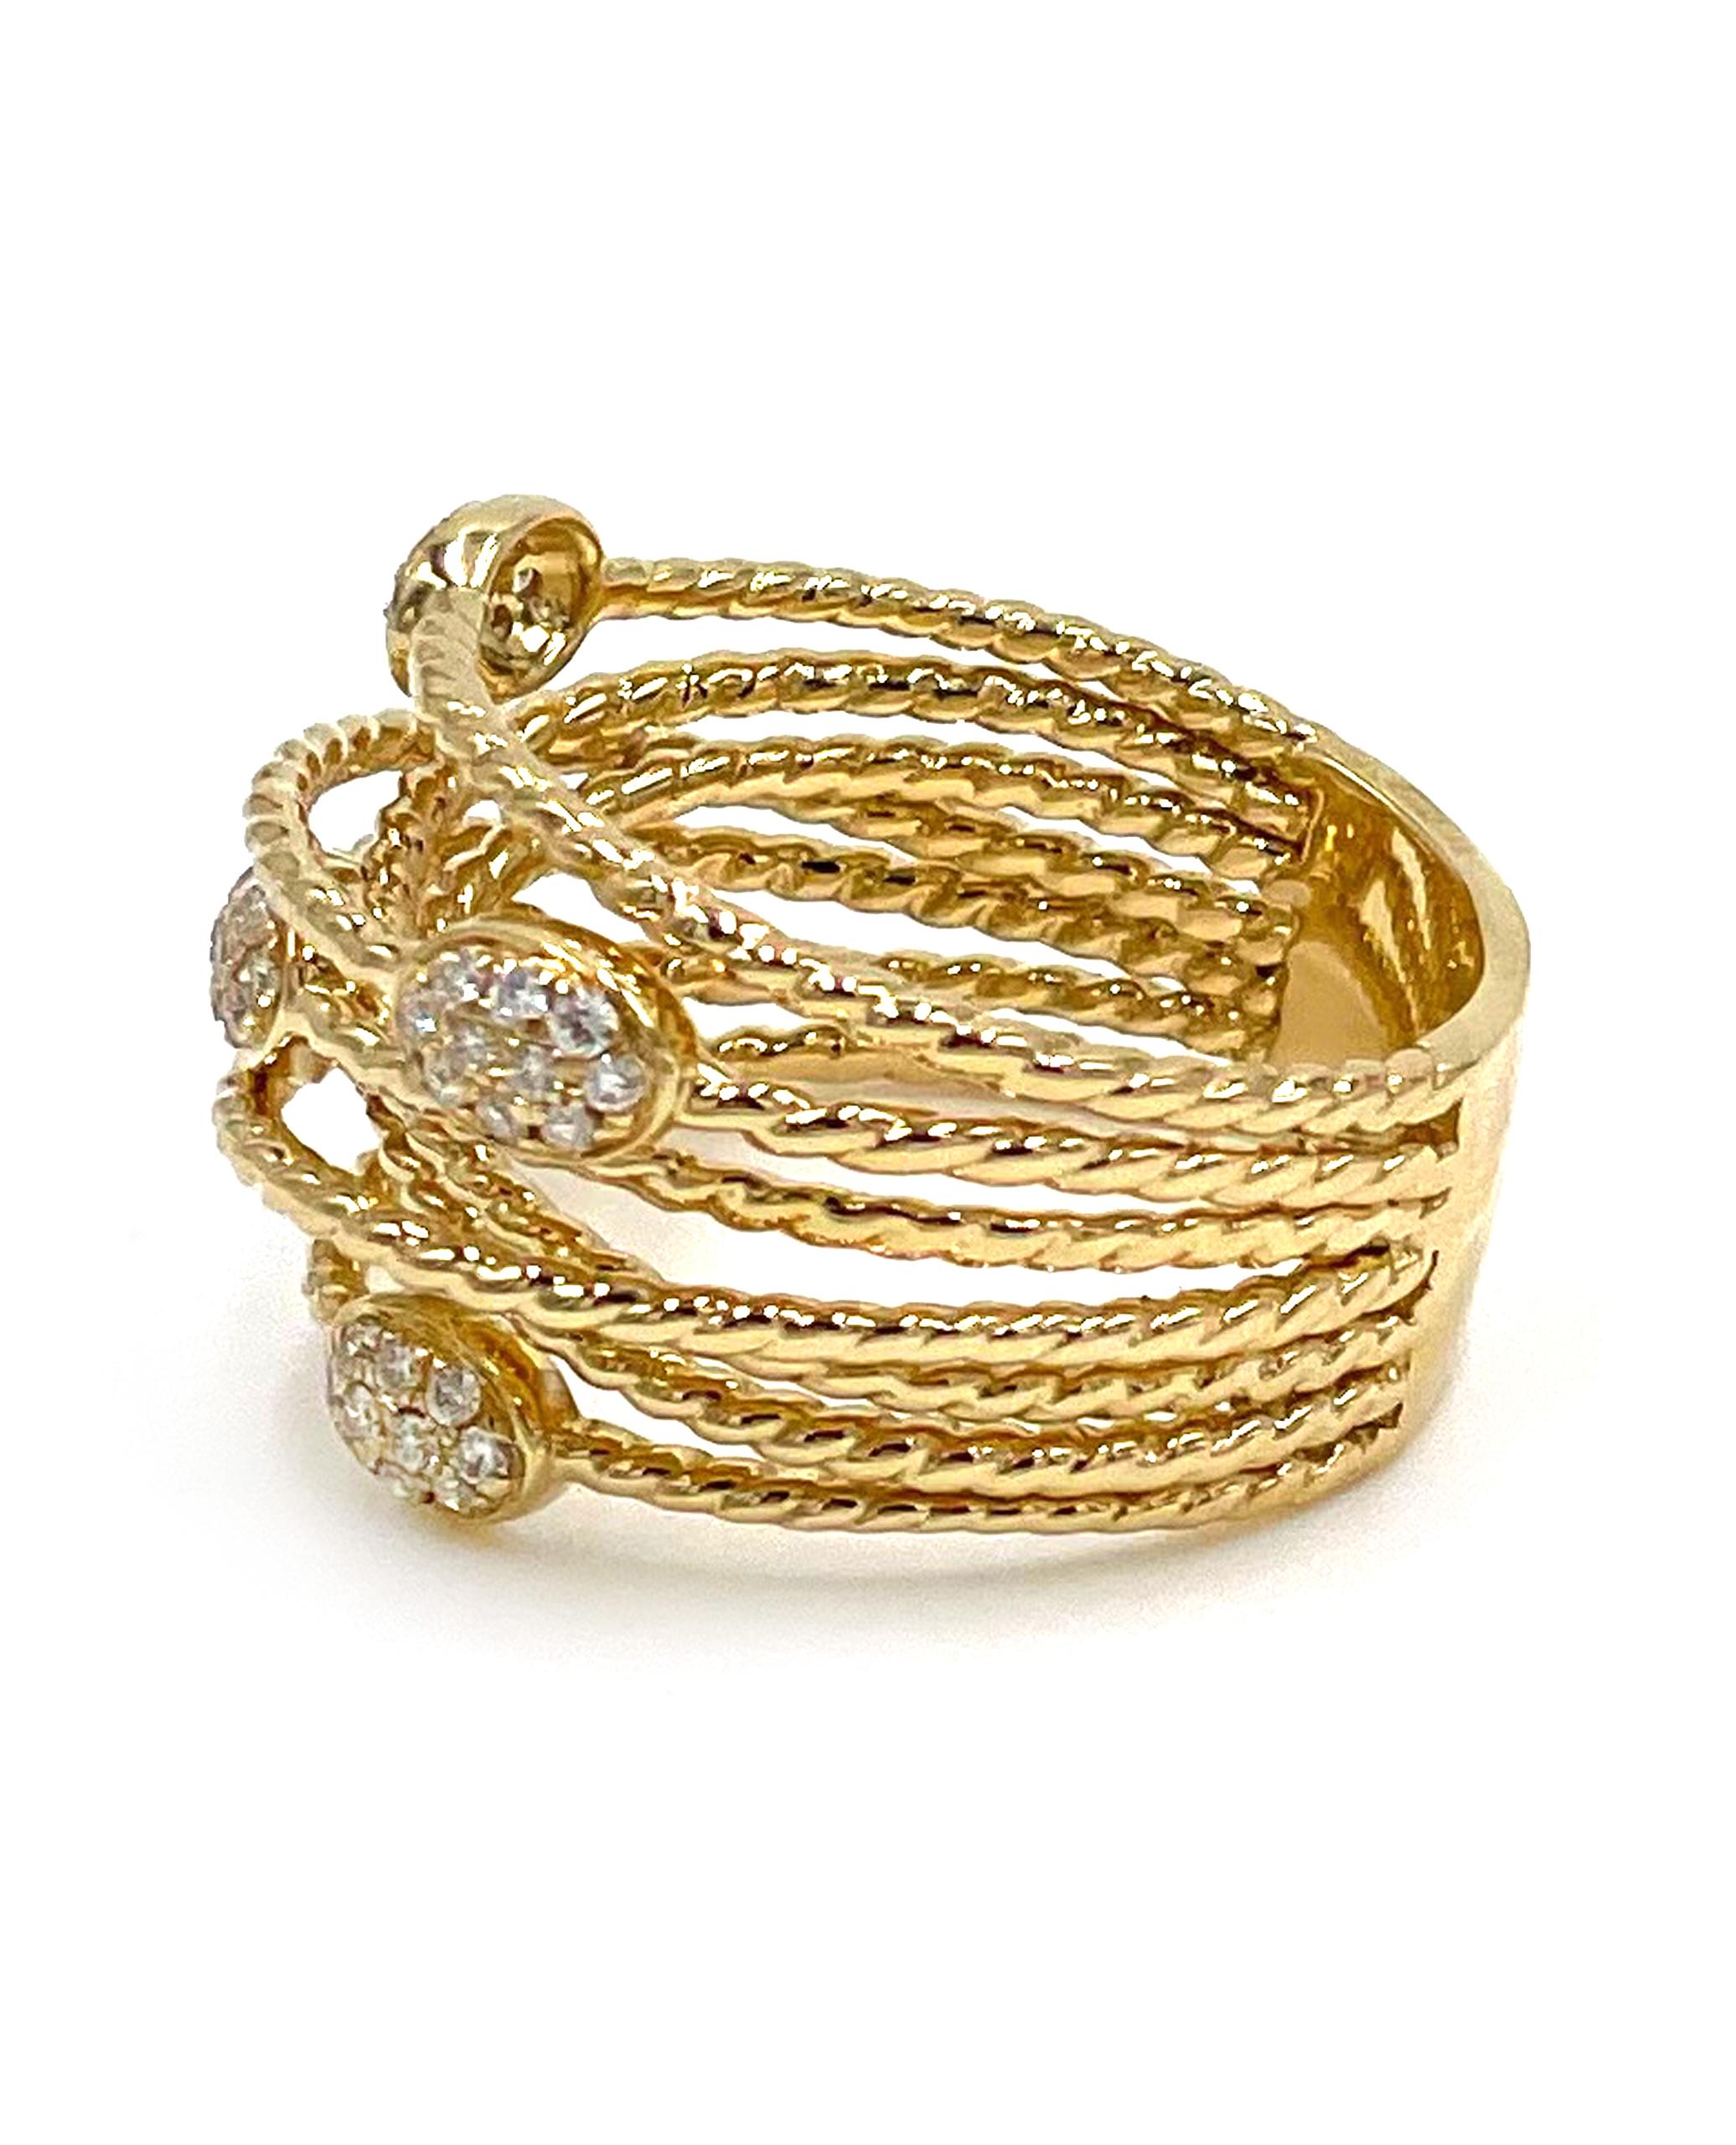 18K yellow gold woven diamond ring with rope detail and 0.28 carat round diamonds.

* Finger size 6.25
* Diamonds are H color, SI clarity